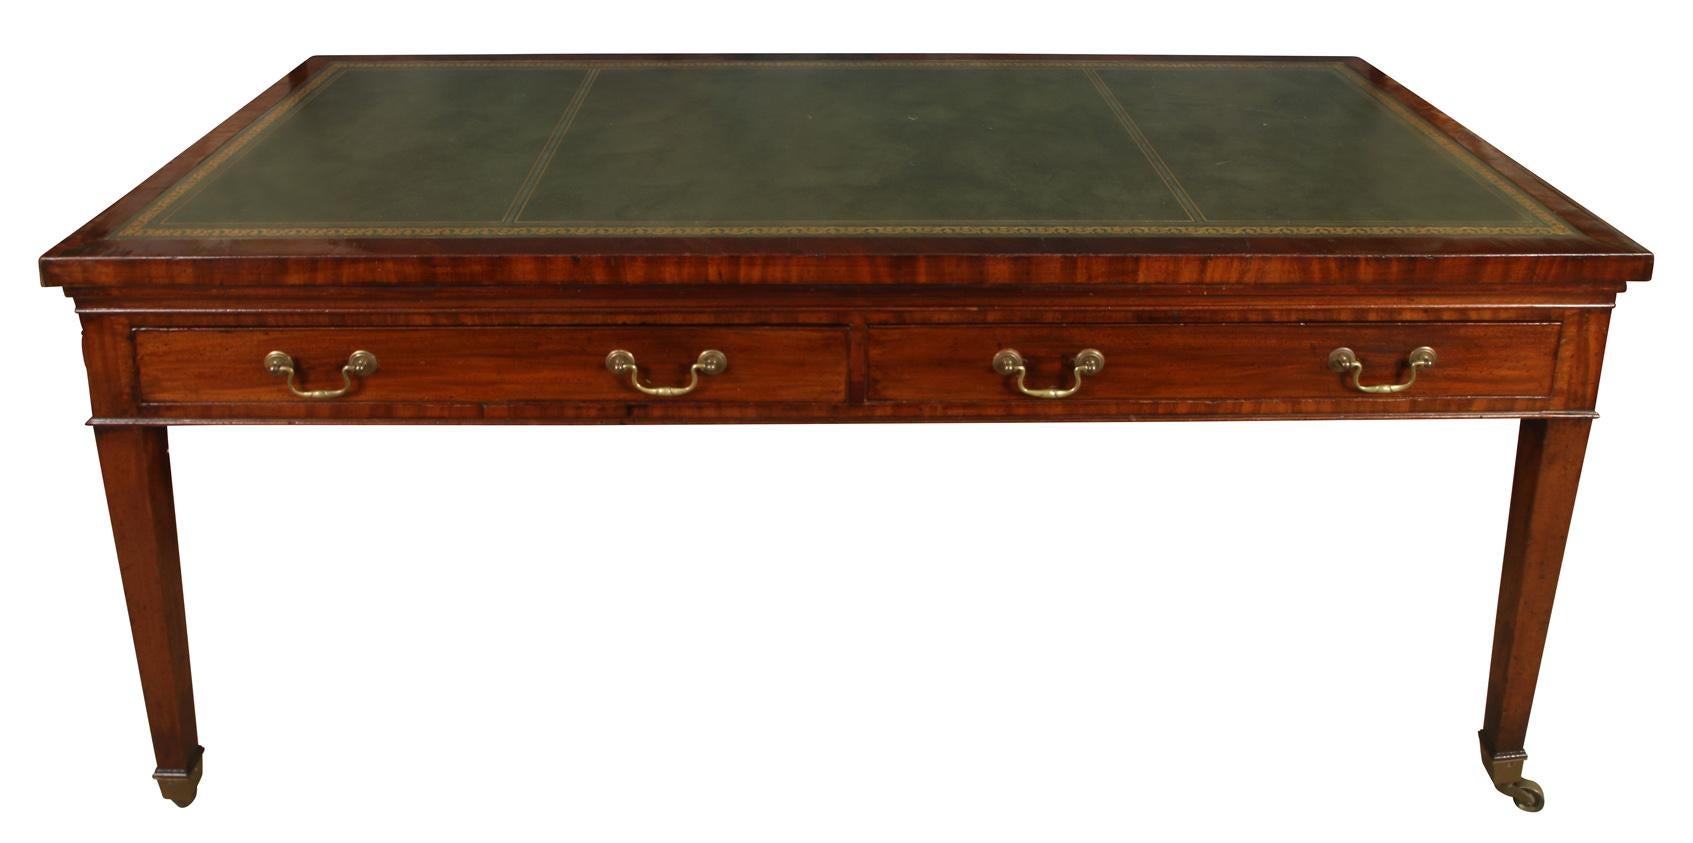 A very handsome Georgian style mahogany desk/writing table with two drawers. The top  has a green tooled leather insert and the tapered legs are raised on castors. The mahogany finish has aged to a wonderful warm patina. Perfect for a library or